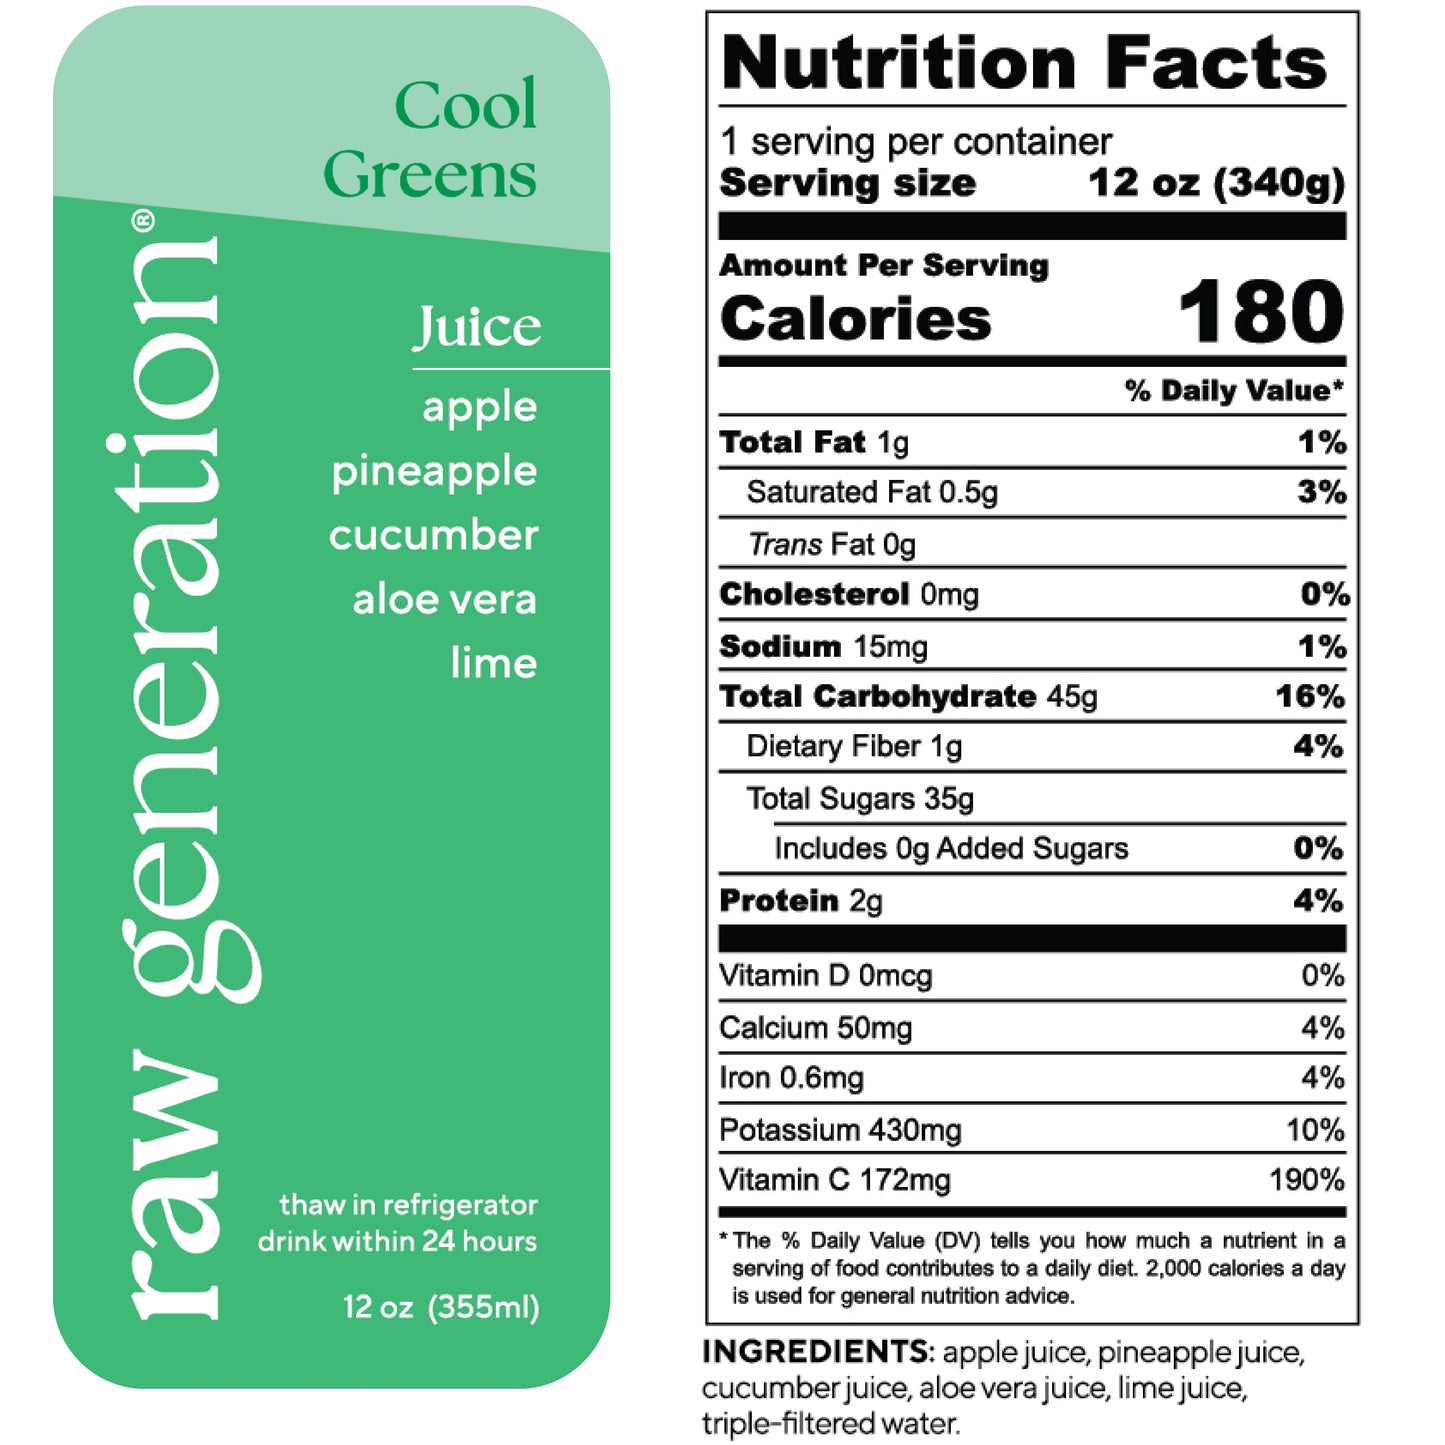 Nutrition Facts, 1 serving/container, 12 oz (340g), Calories 180, Total Fat 1g, Saturated Fat 0.5g, Trans Fat 0g, Cholesterol 0mg, Sodium 15mg, Total Carbohydrate 45g, Dietary Fiber 1g, Total Sugars 35g, Added Sugars 0g, Protein 2g, Vitamin D 0mcg, Calcium 50mg, Iron 0.6mg, Potassium 430mg, Vitamin C 172mg; Ingredients: apple juice, pineapple juice, cucumber juice, aloe vera juice, lime juice, triple-filtered water.